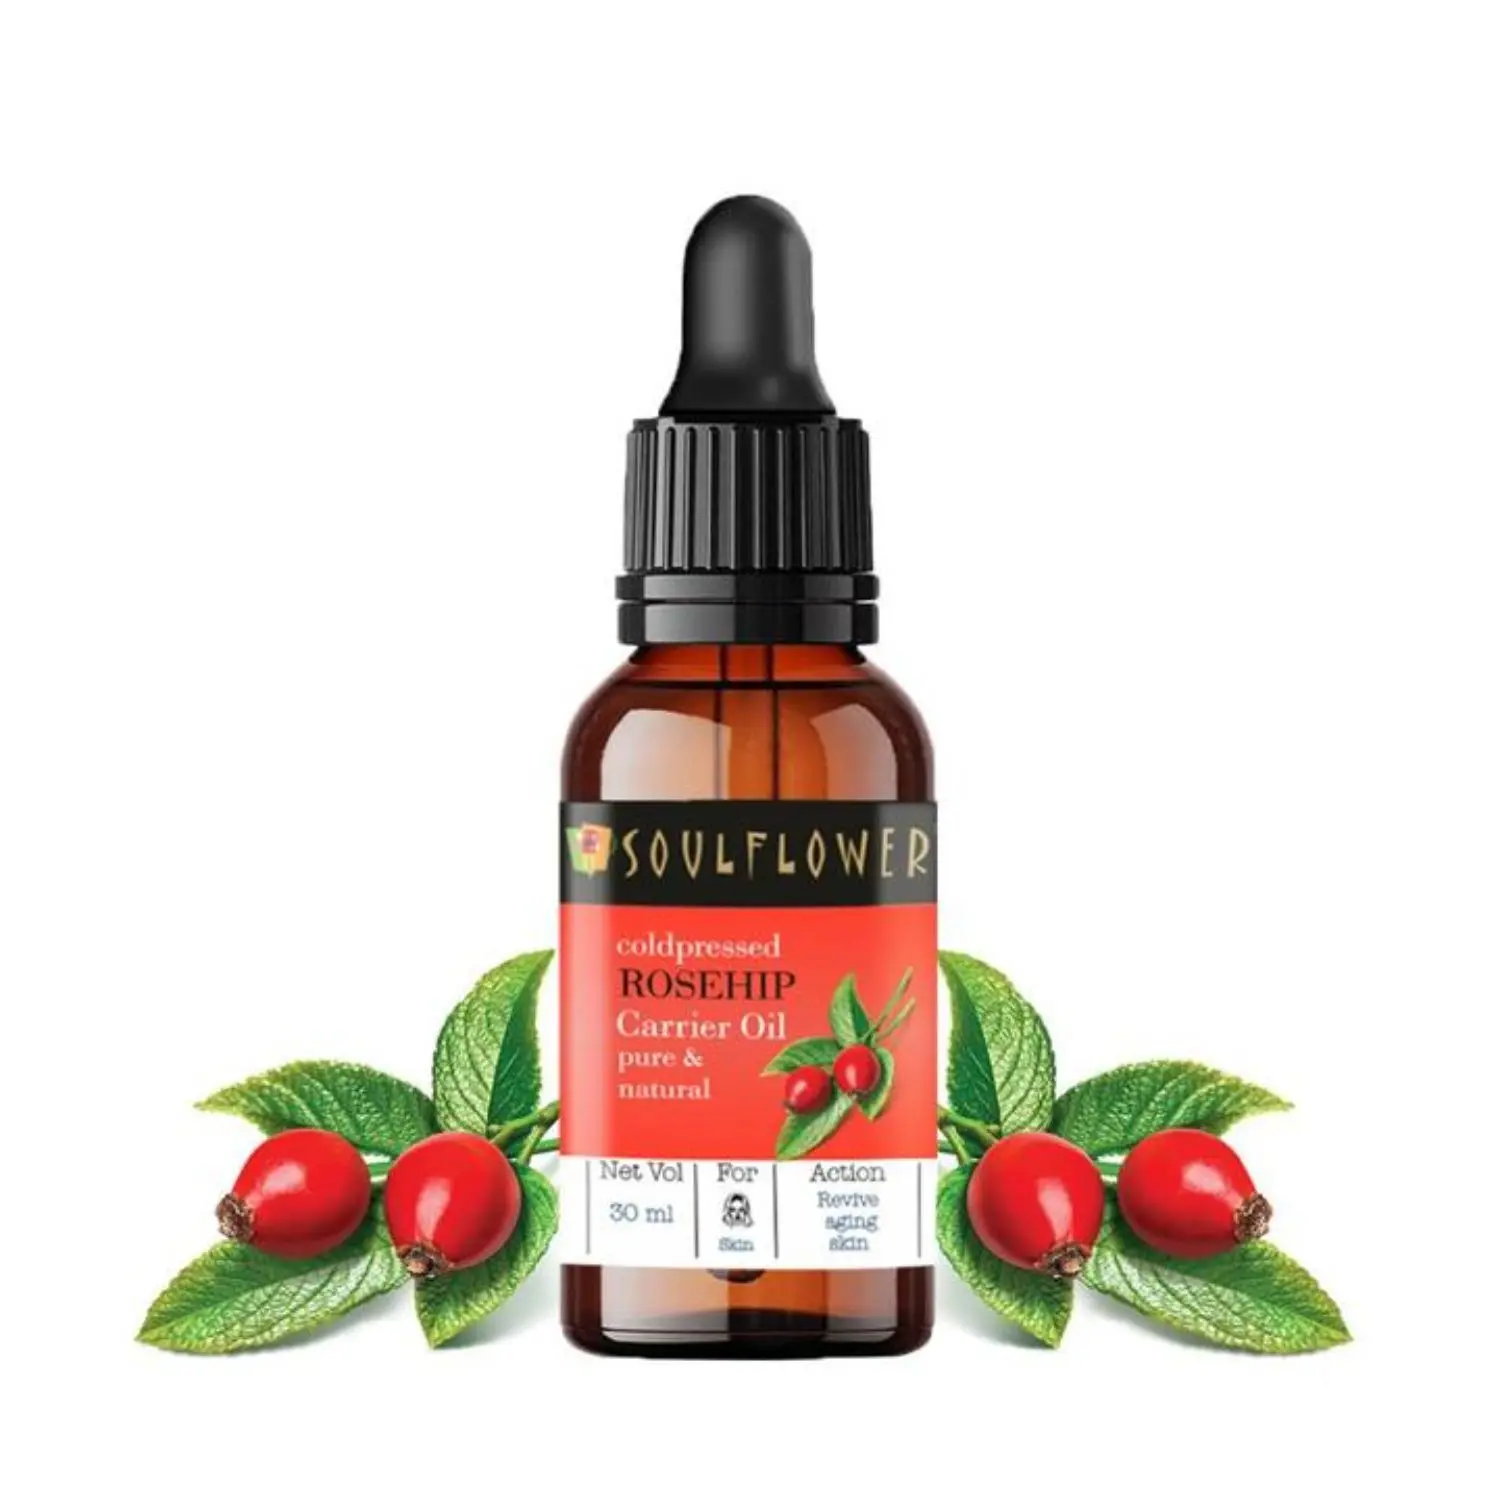 Soulflower Coldpressed Rosehip Hair Oil , 100% Pure and Natural, Traditional Handmade, 30ml